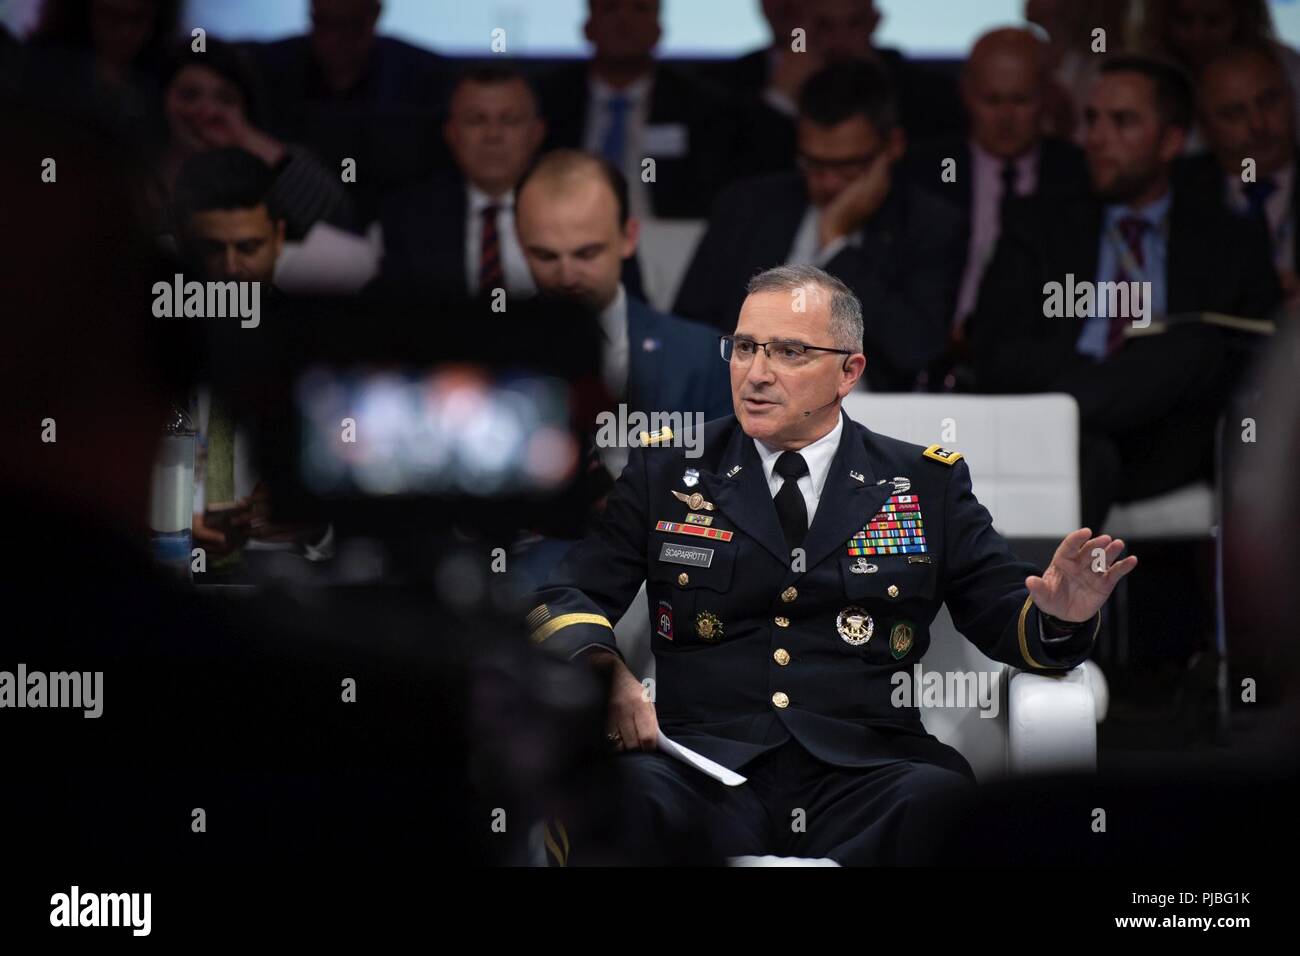 General Curtis M. Scaparrotti, Supreme Allied Commander Europe, discusses his challenges as a NATO strategic military commander, with General (Ret) James “Jim” Jones Jr., during the Brussels Summit Dialogue at NATO HQ, Brussels, July 12, 2018. The Brussels Summit Dialogue was a side venue that took place alongside the Brussels Summit, bringing experts from through NATO and the European Union together to discuss current topics affecting the transatlantic states. (NATO Stock Photo